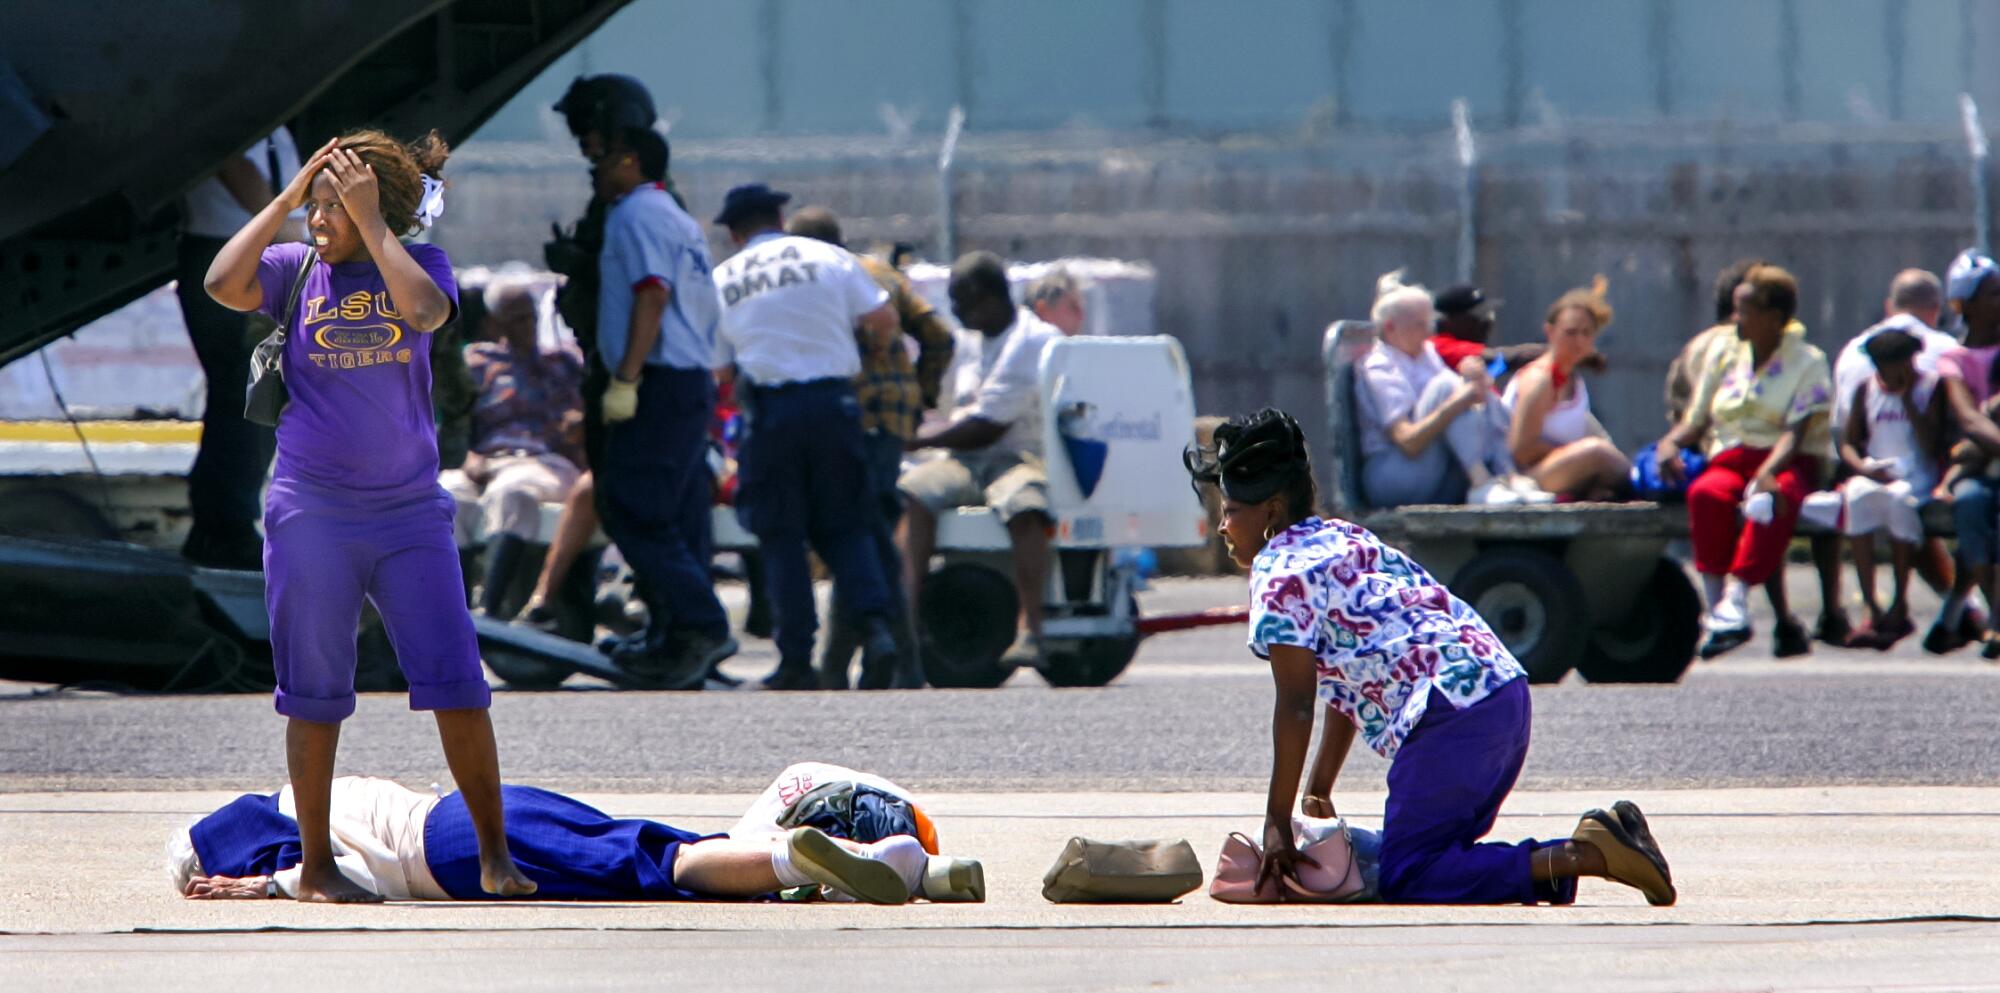 A woman looks around while another kneels by someone who's fallen